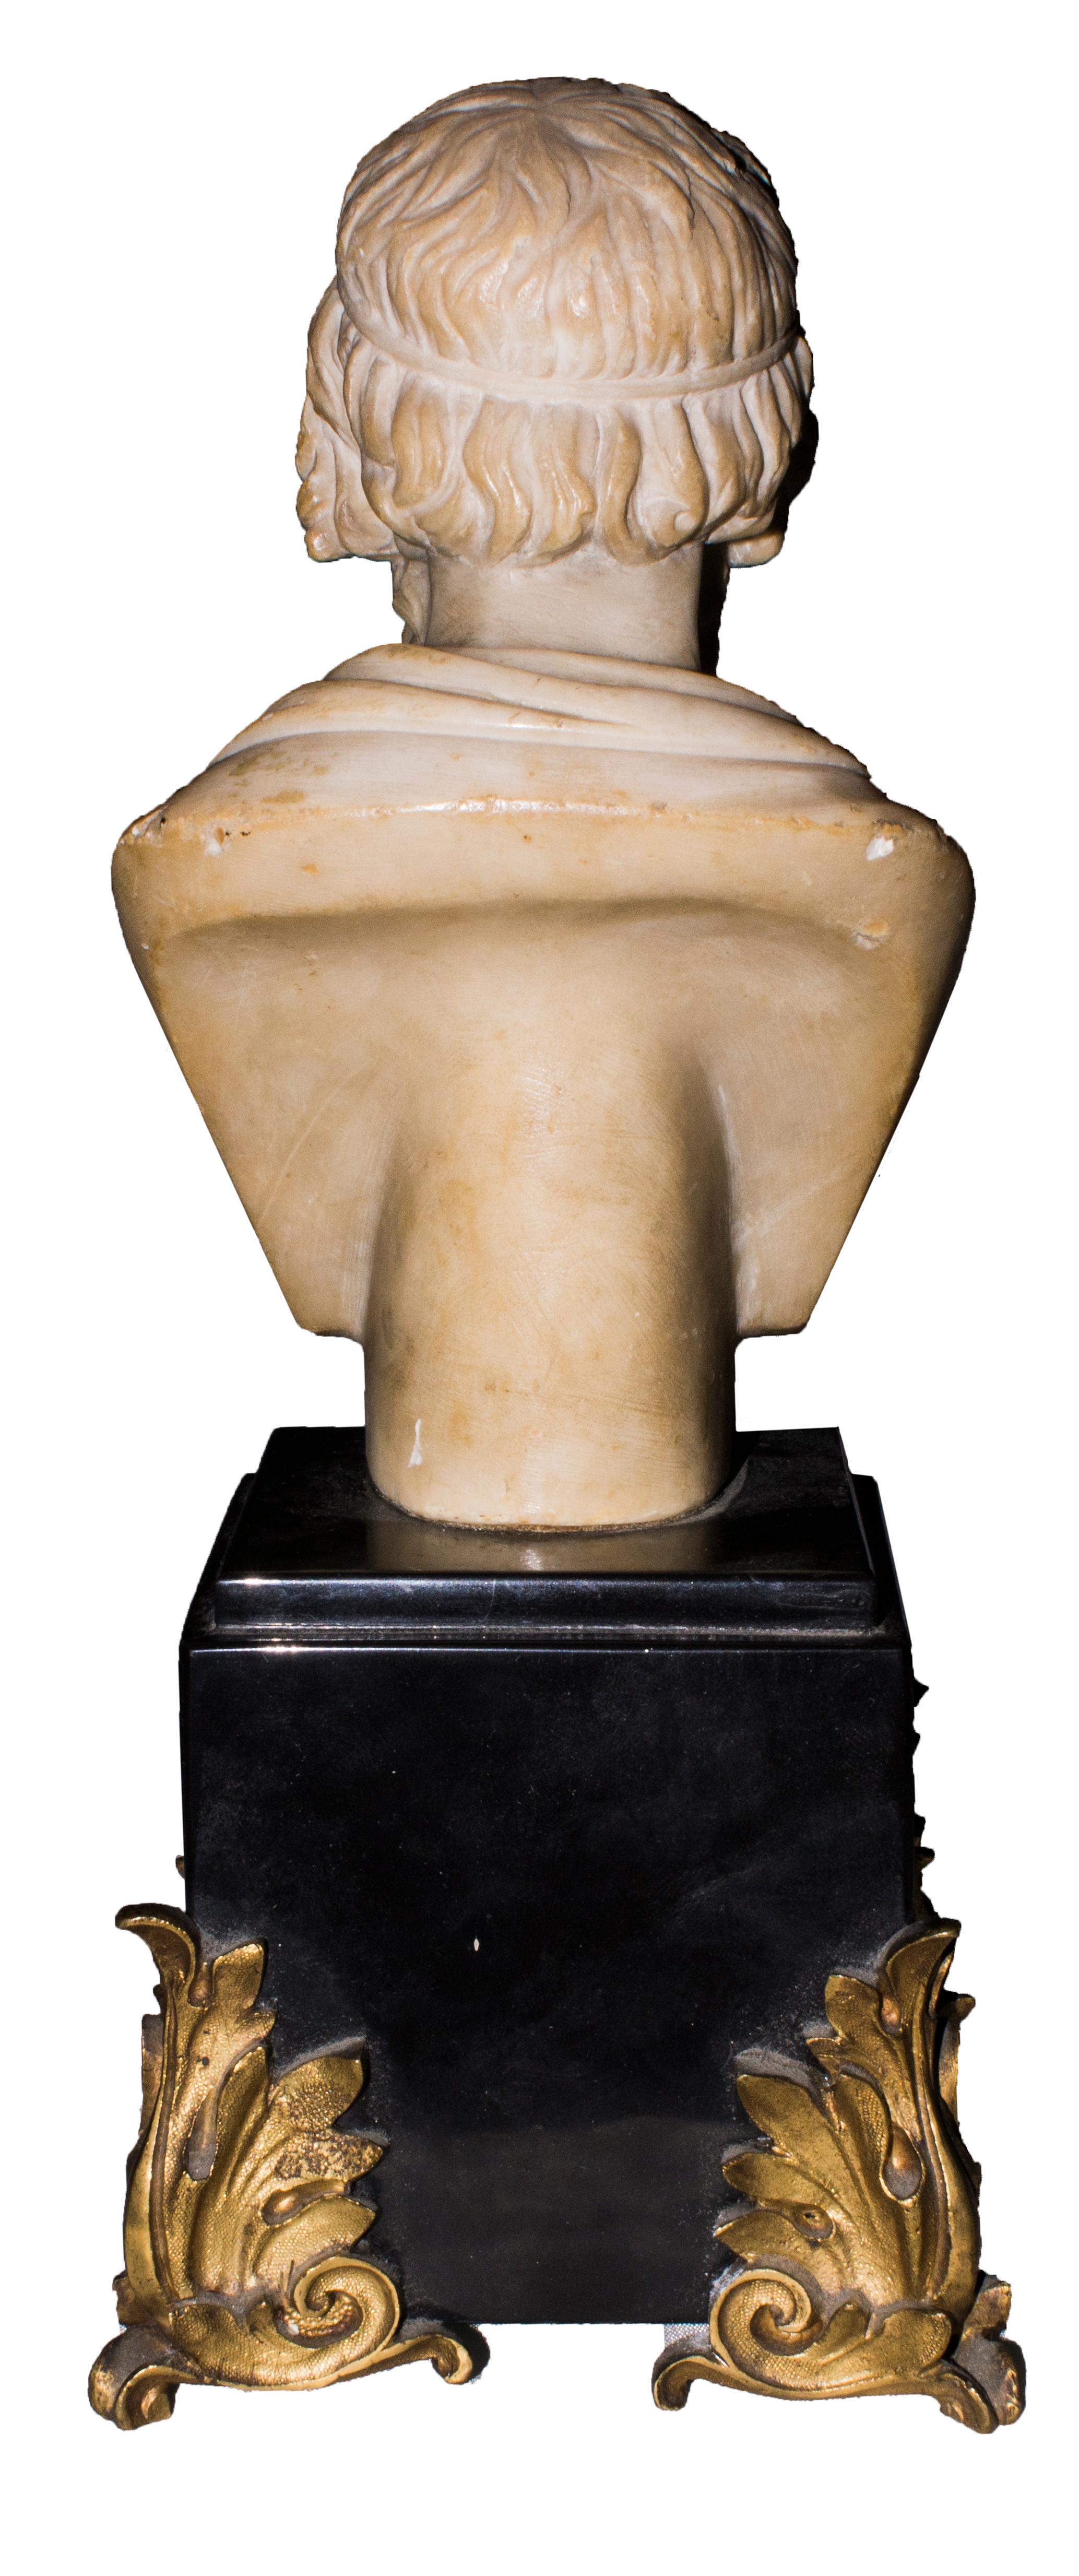 Alabaster sculpture with base in black marble and 4 friezes legs in golden bronze.

This artwork is shipped from Italy. Under existing legislation, any artwork in Italy created over 70 years ago by an artist who has died requires a licence for